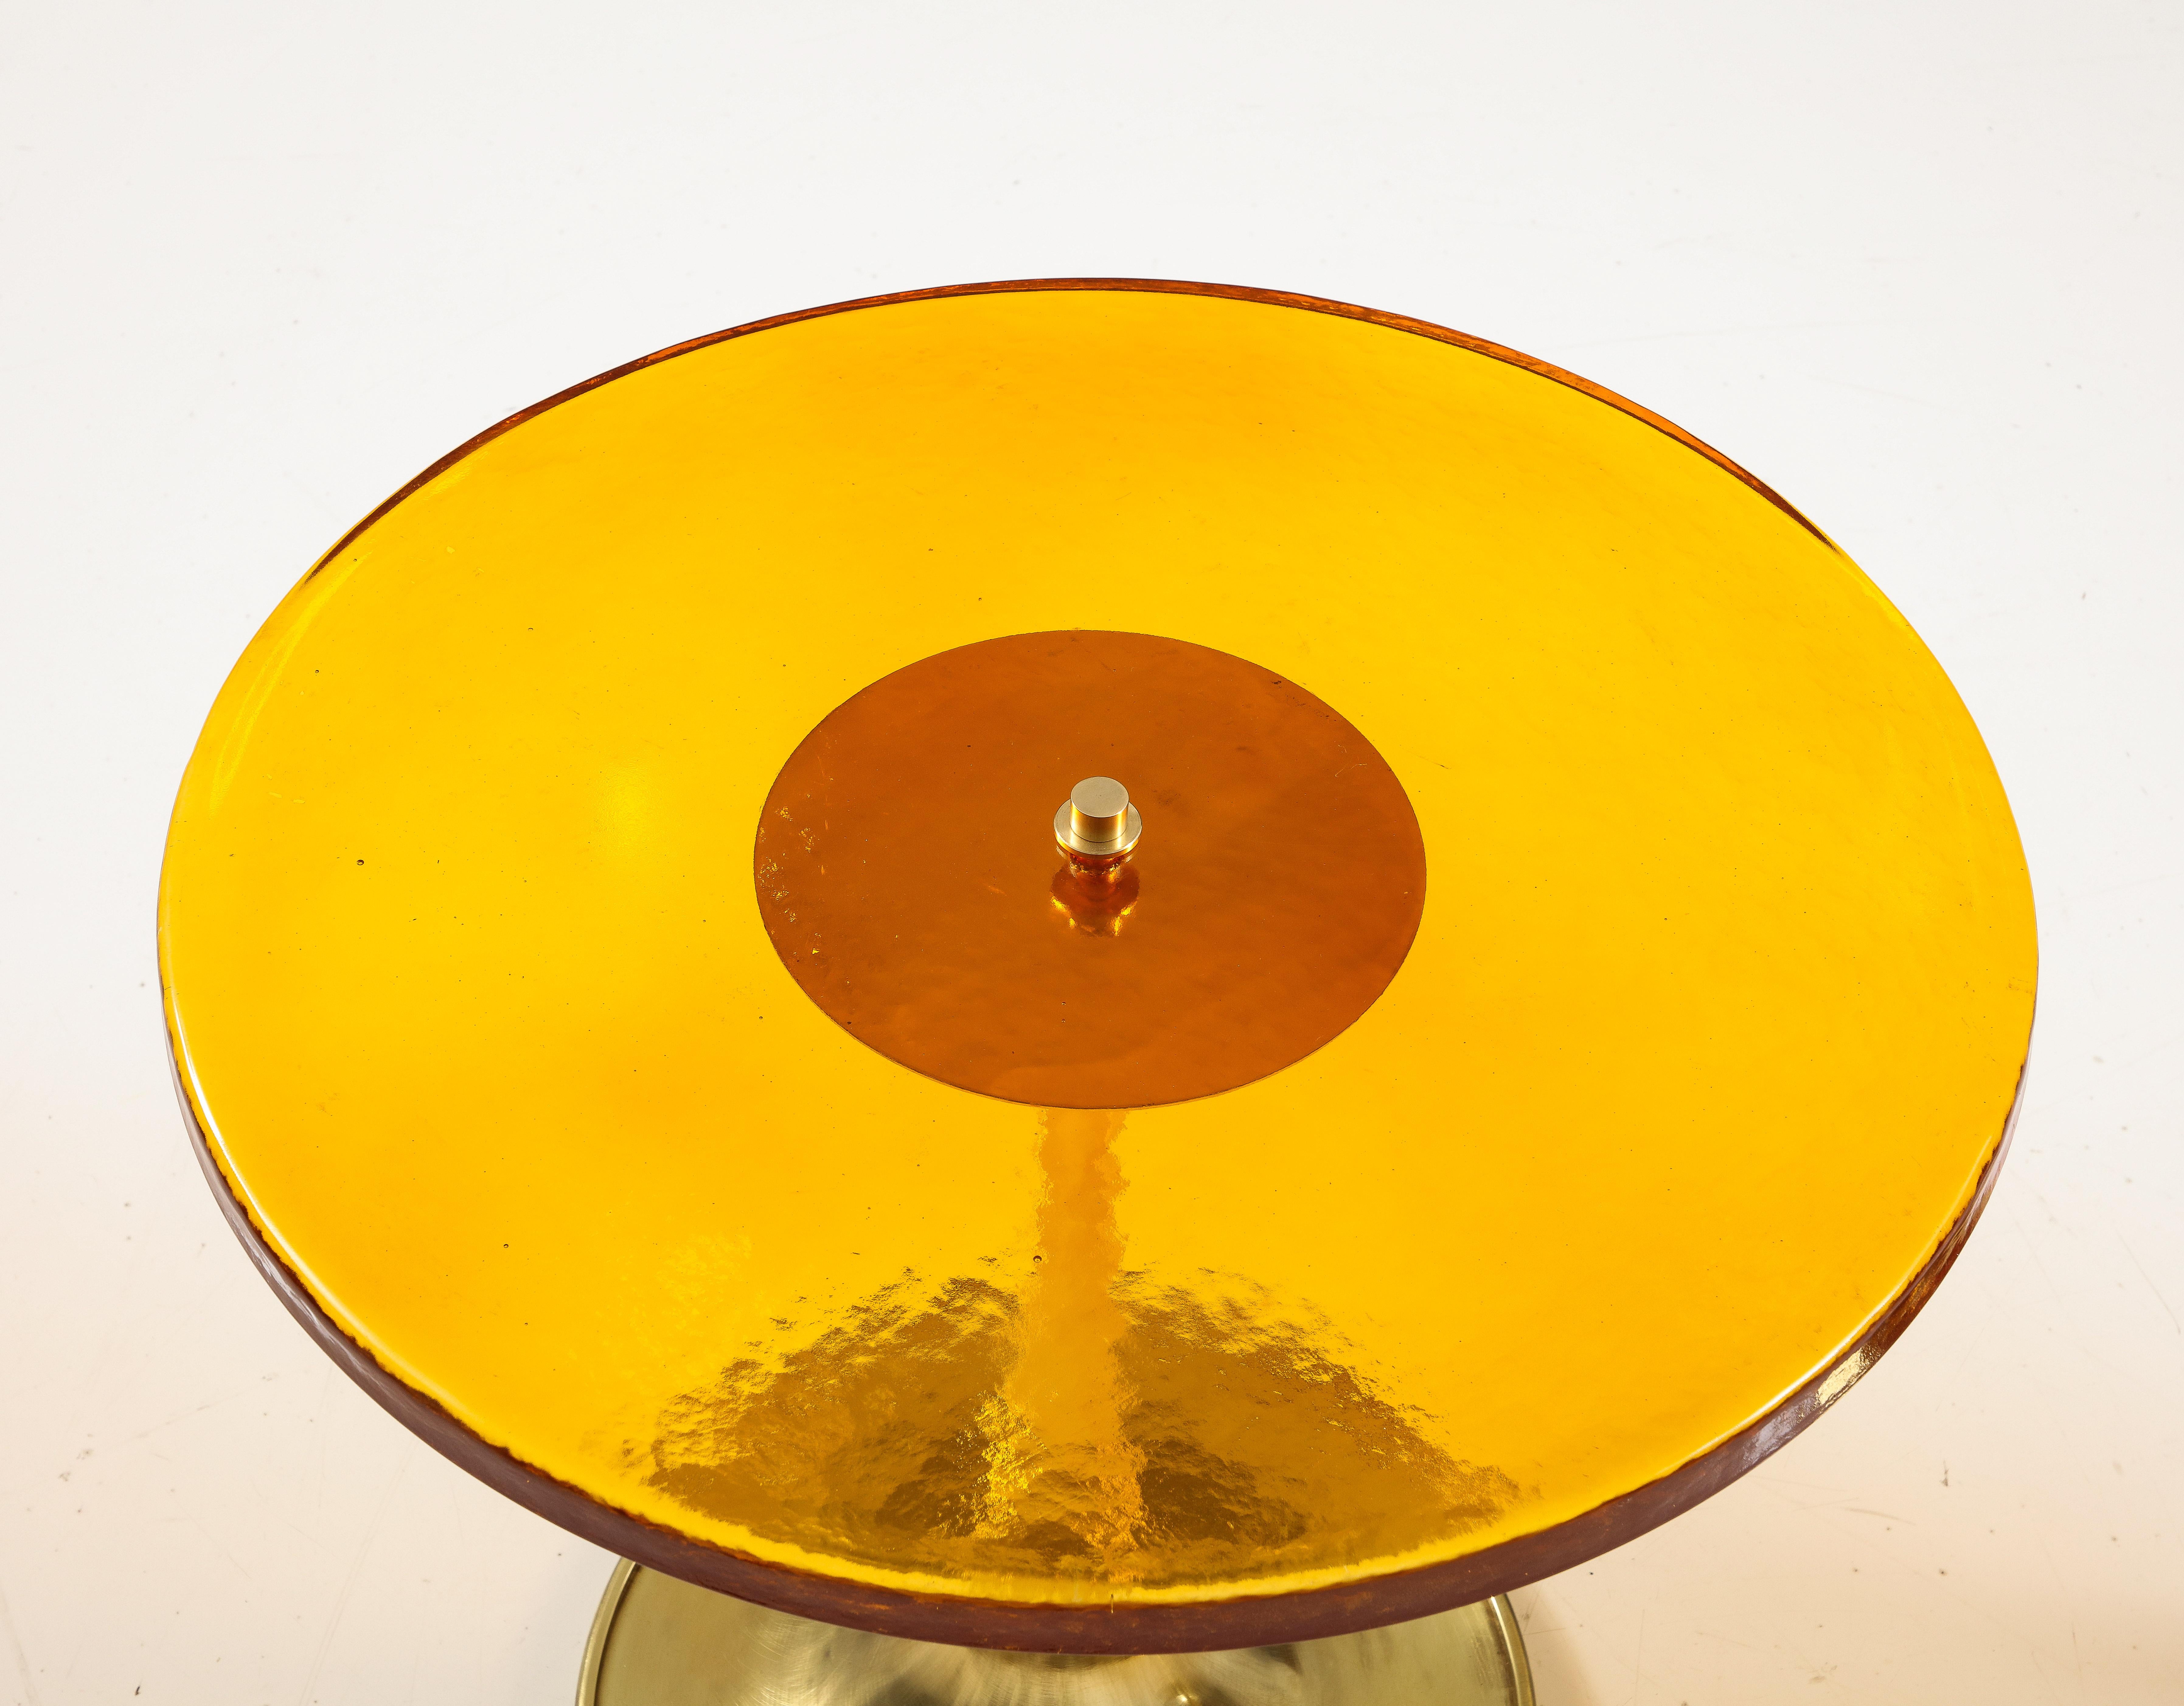 Round Amber or Deep Gold Murano Glass and Brass Martini or Side Table, Italy, 2023. Hand-casted 1 inch thick, solid, amber or deep gold (almost orange) colored Murano round glass top sits atop a hand-turned, trumpet-shaped brass base. A modern flat